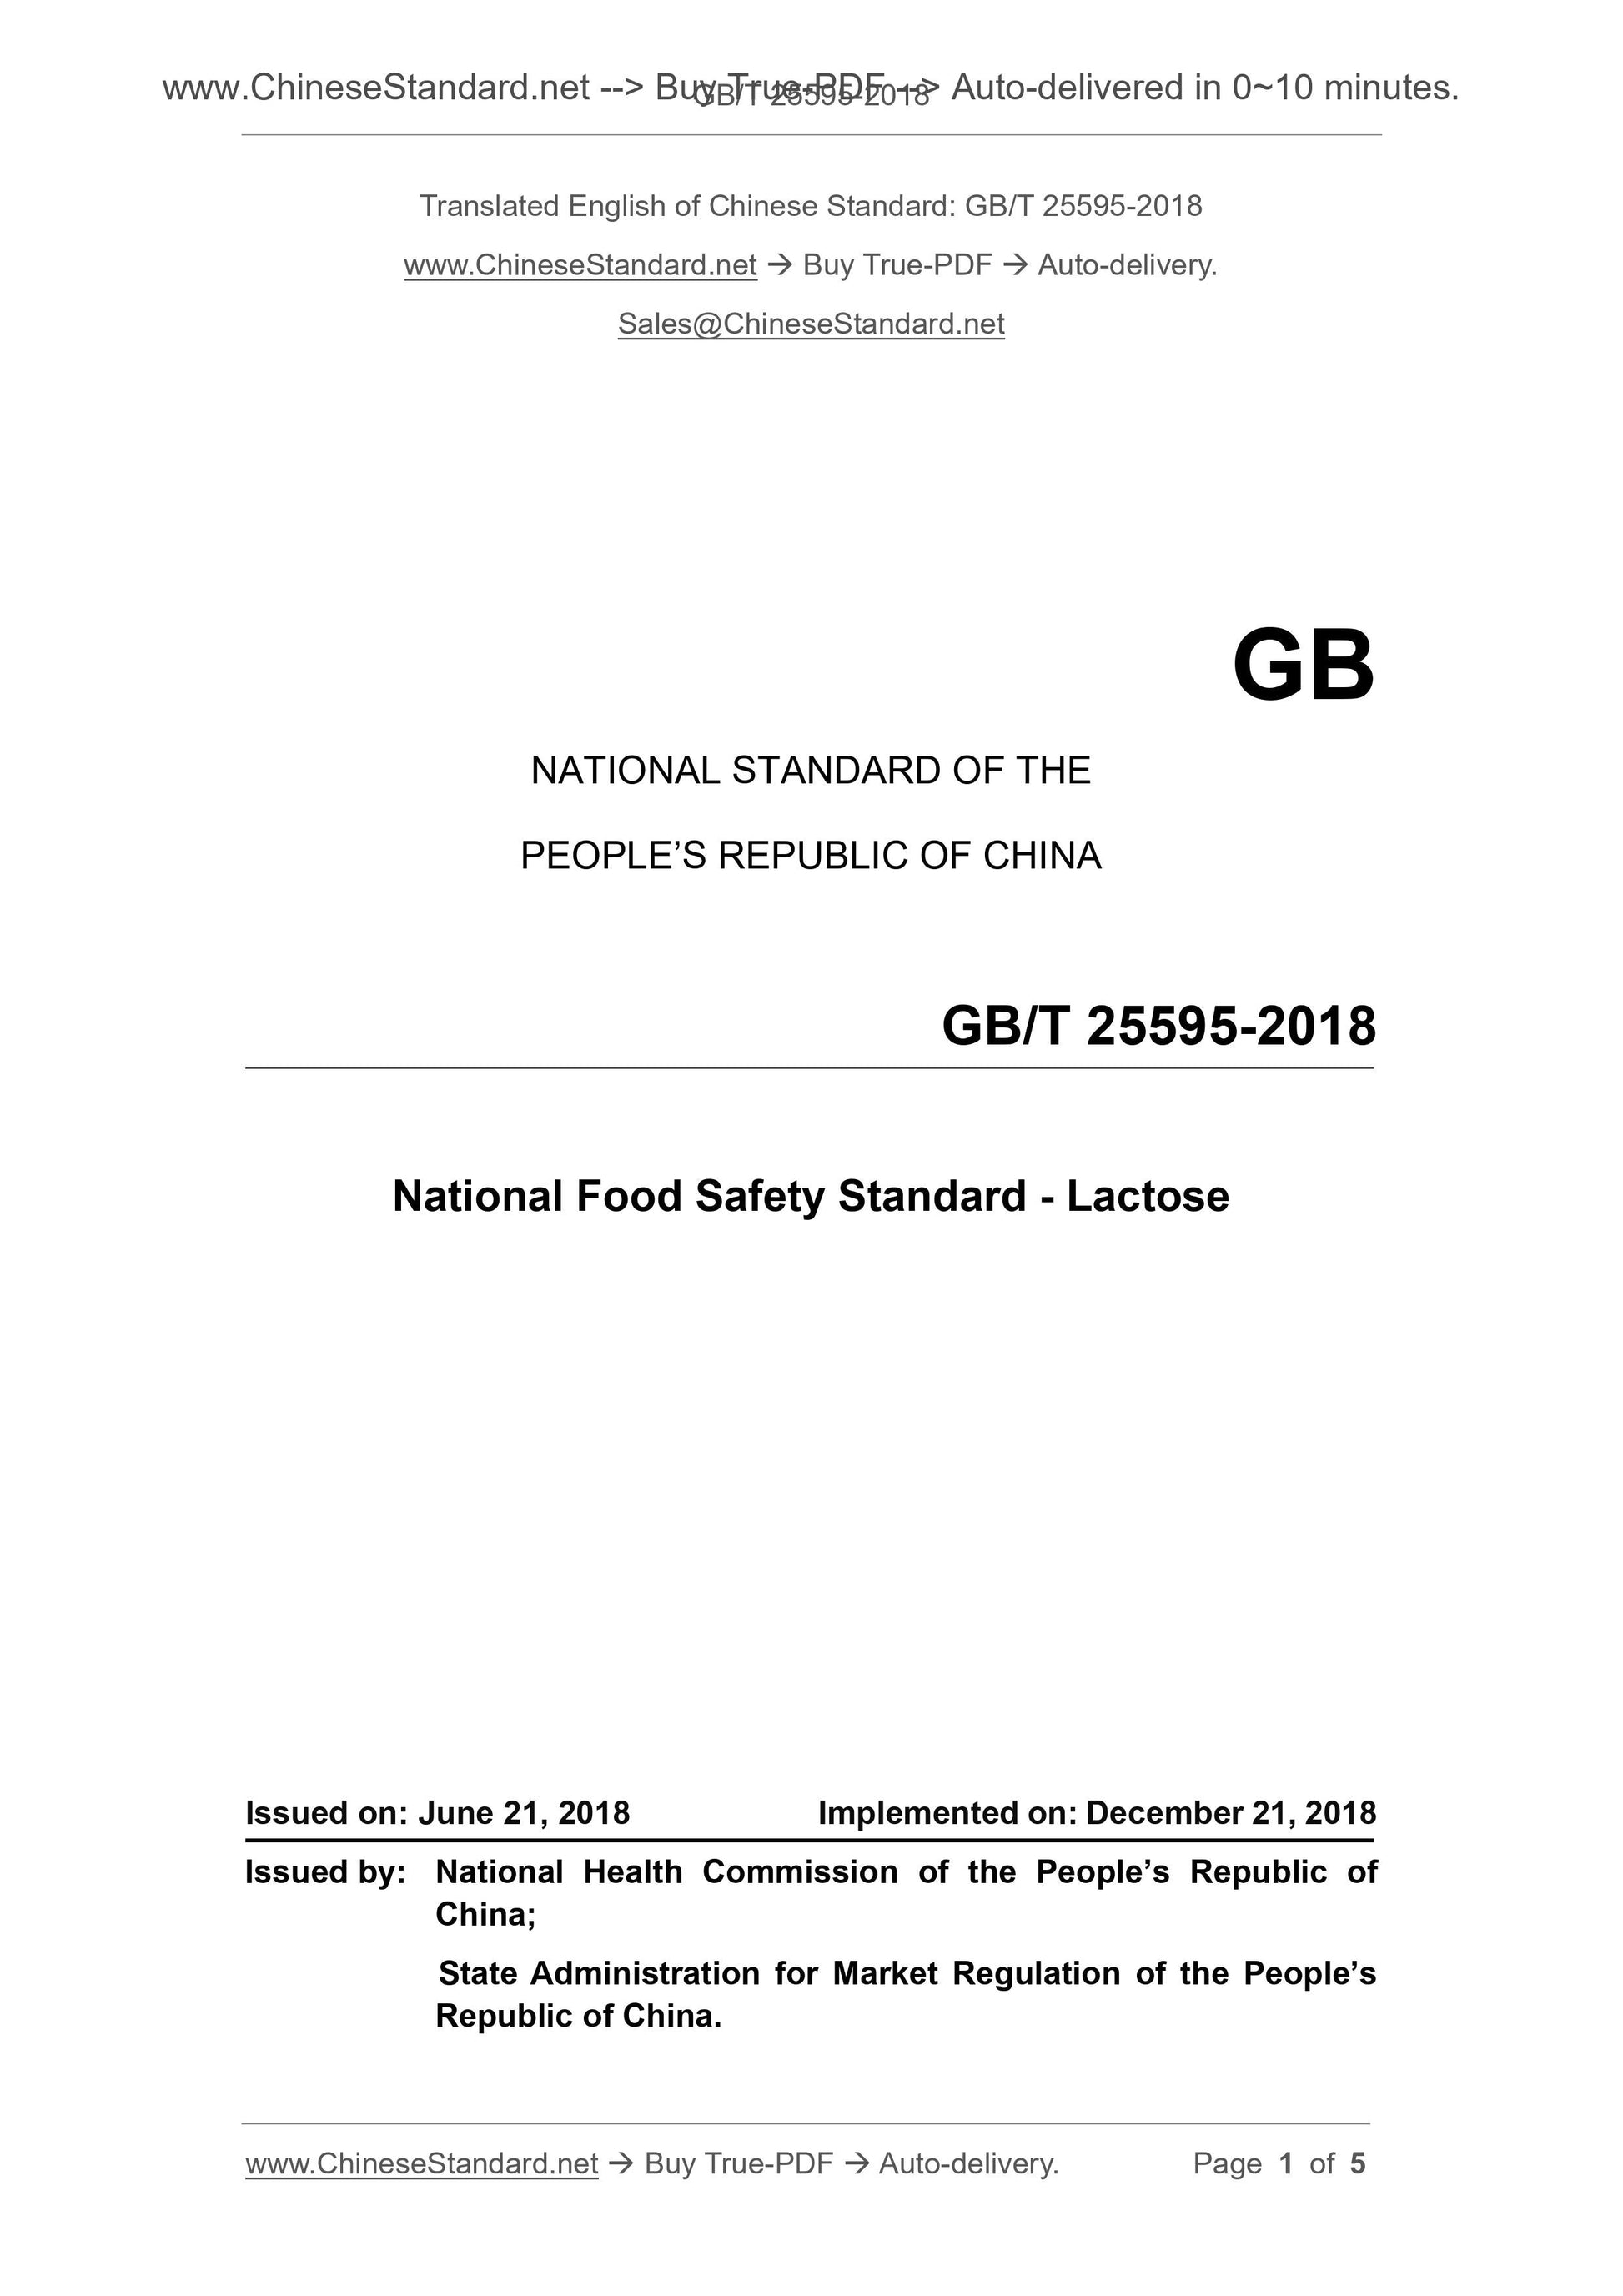 GB 25595-2018 Page 1